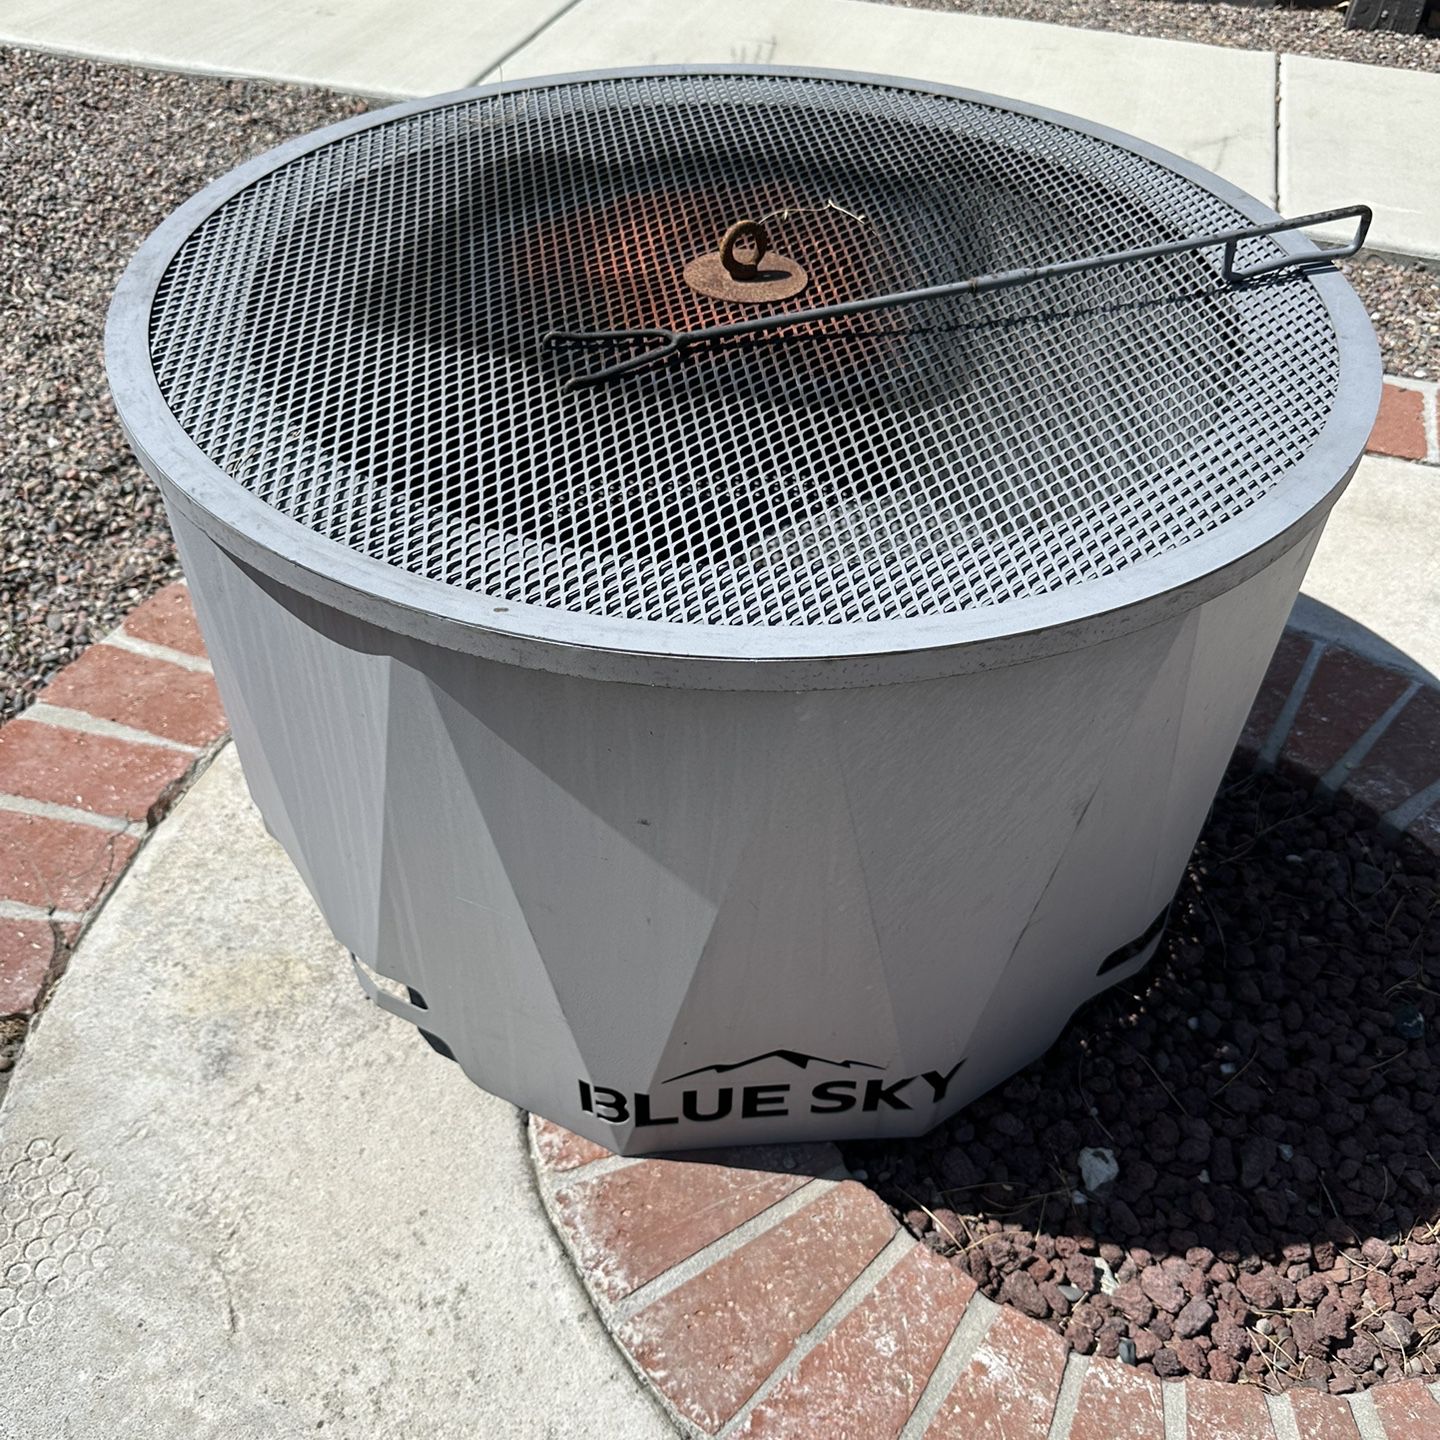 Used Blue Sky Fire Pit with Spark Screen